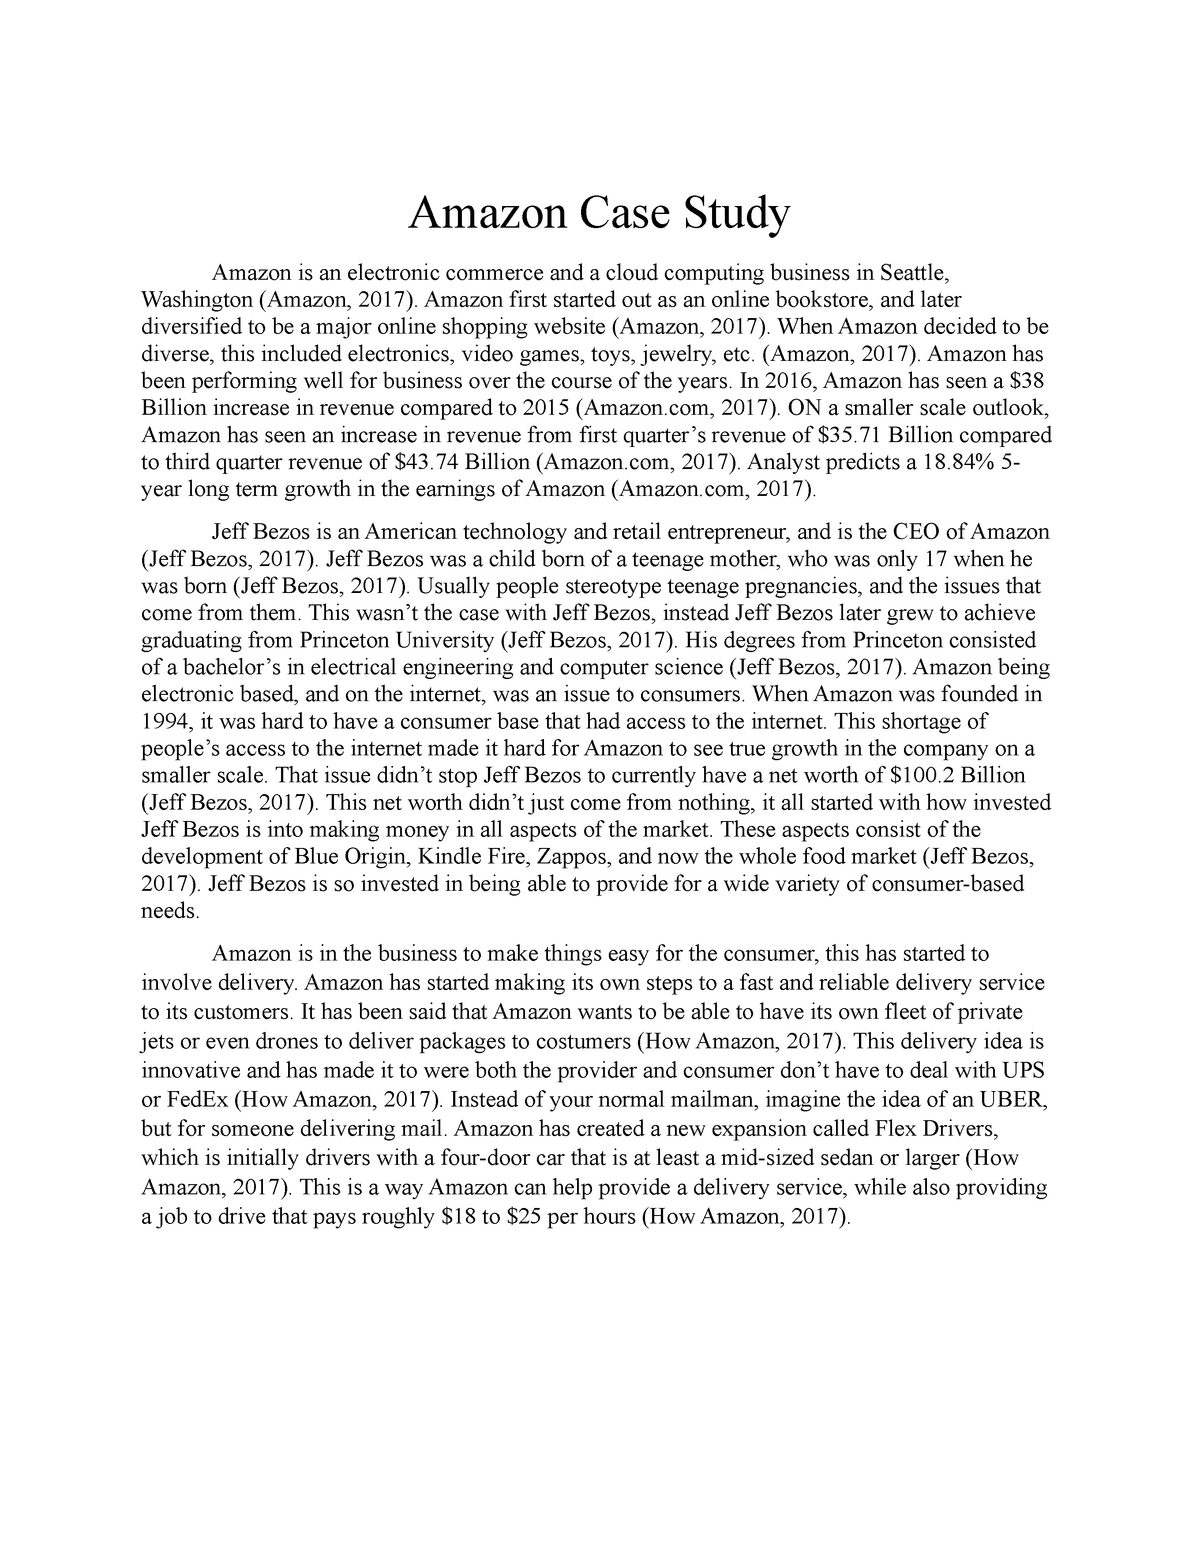 amazon case study questions and answers